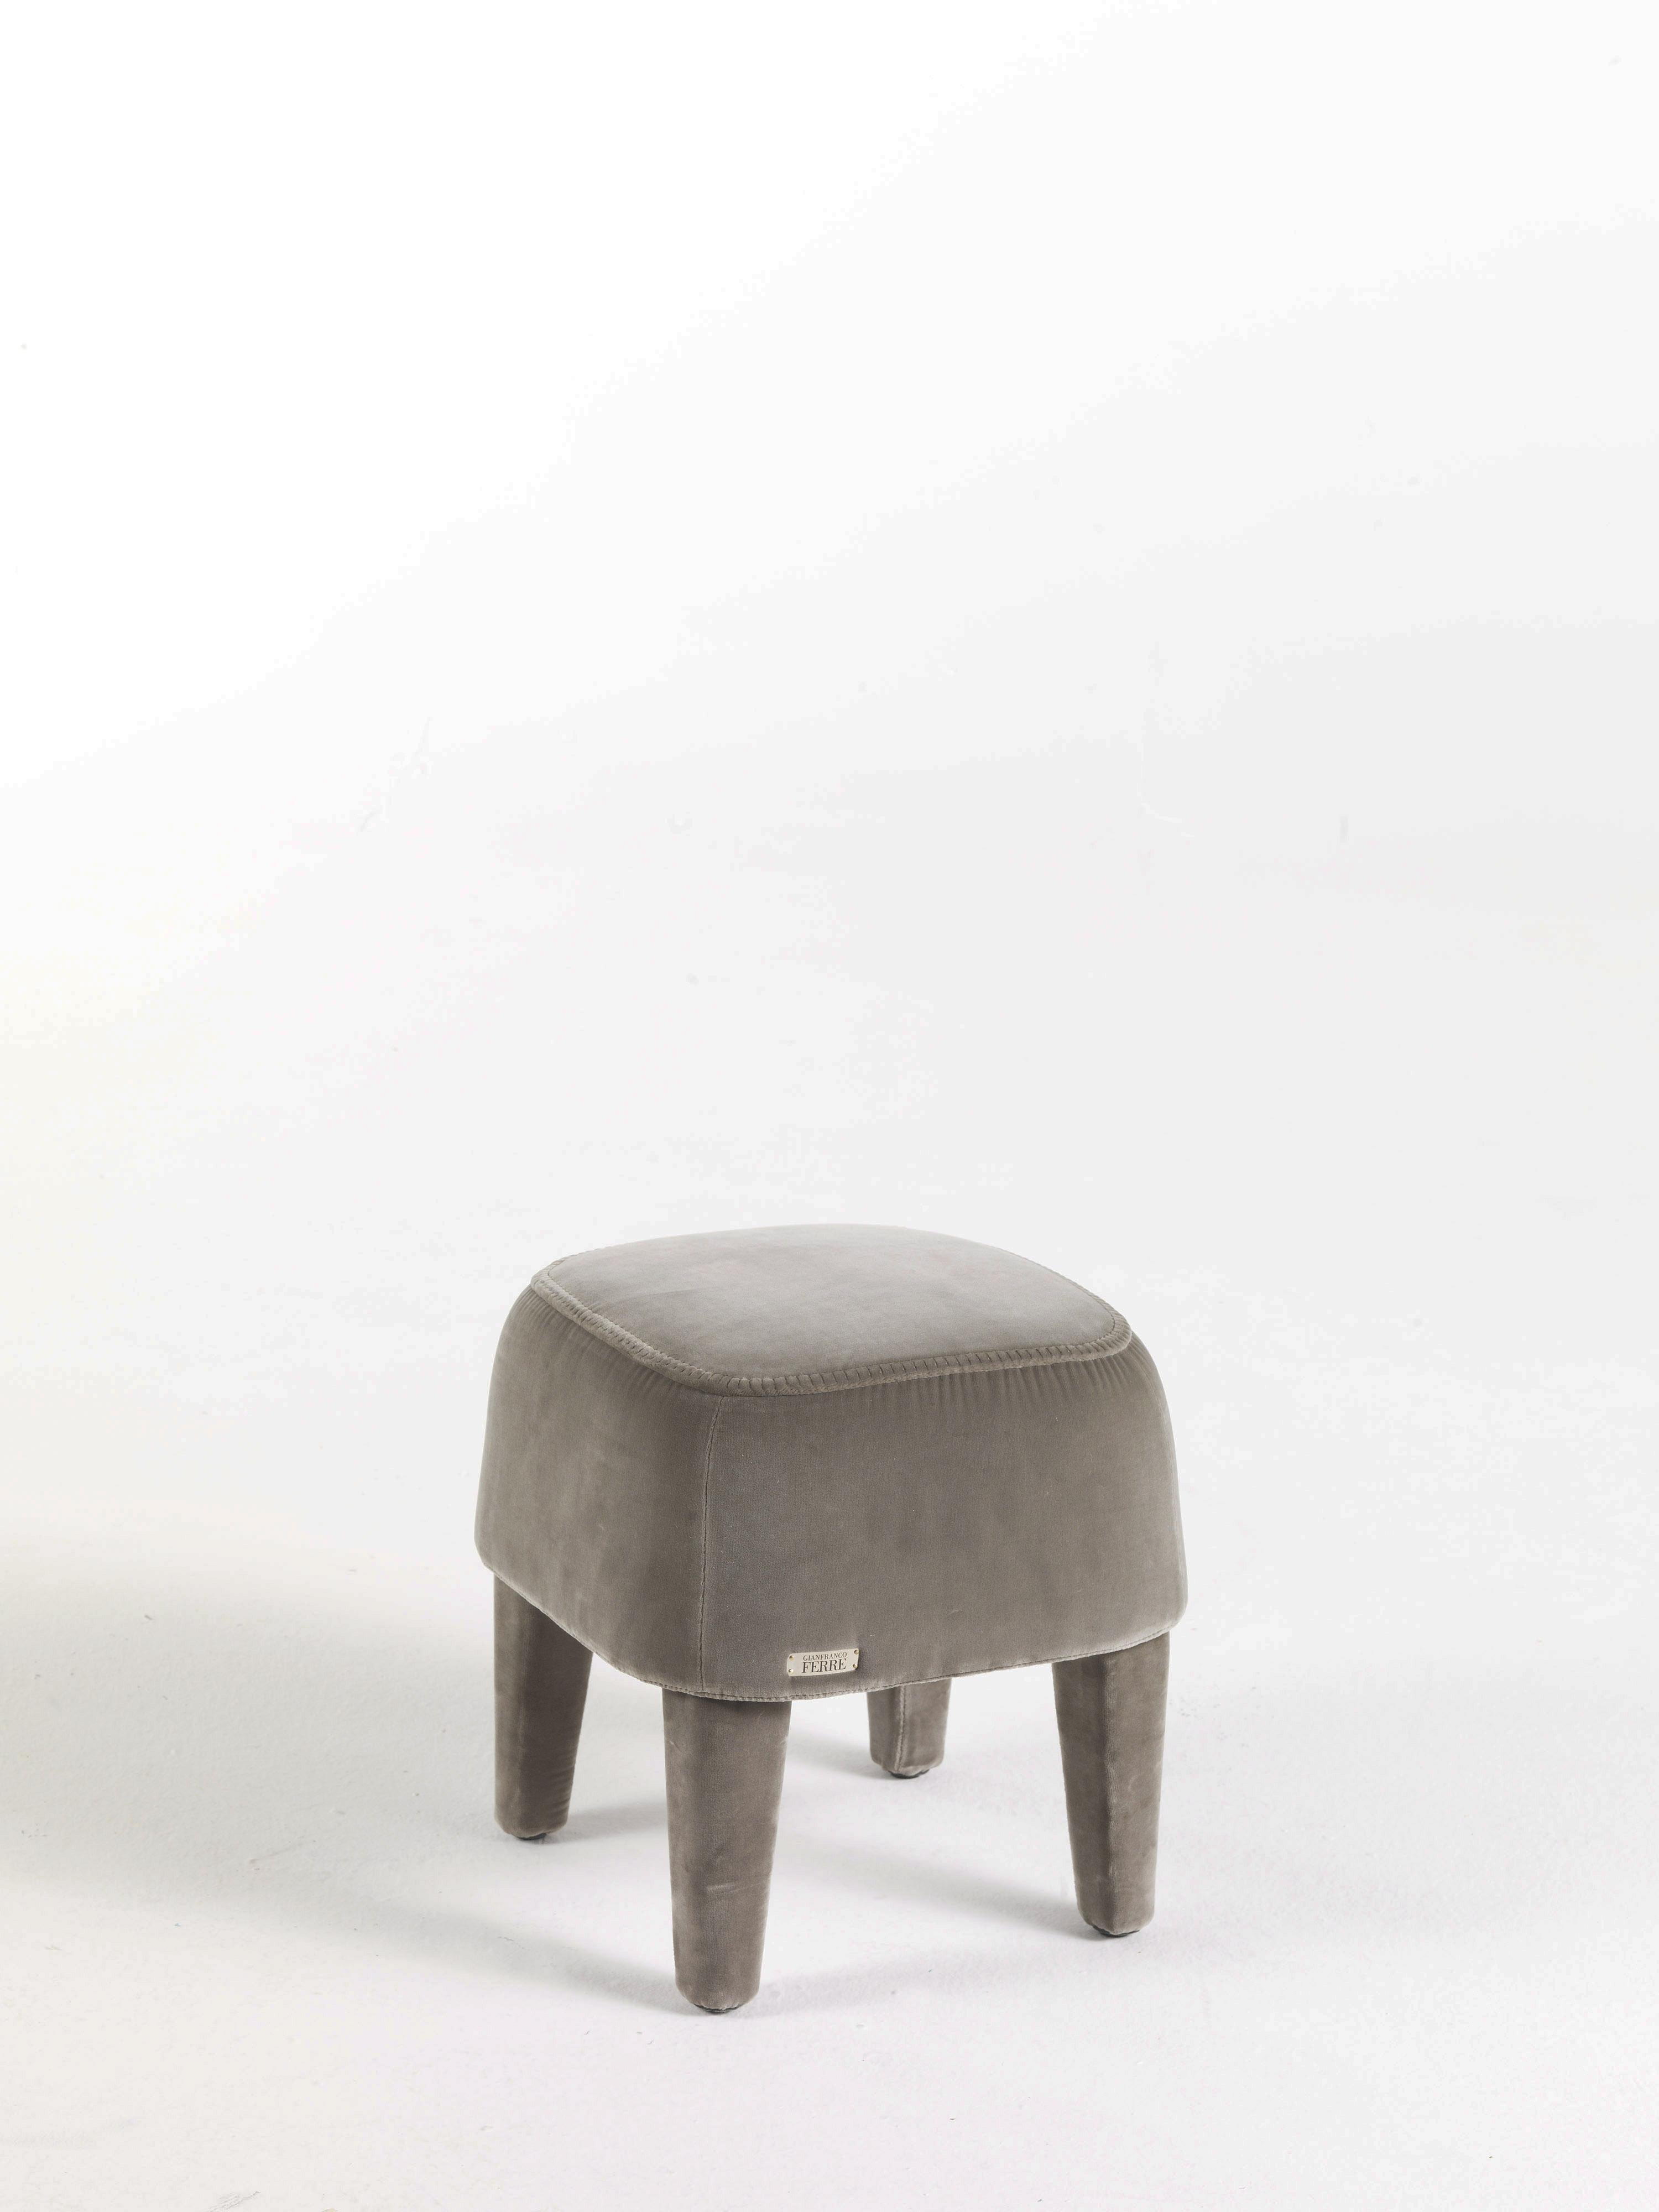 The Mini pouf features a light and versatile design. Small, soft and compact, it adds character to any setting. Available in different menswear fabrics of the collection: pied-de-poule, pinstripe, twill, Prince of Wales.
Mini Pouf with the structure